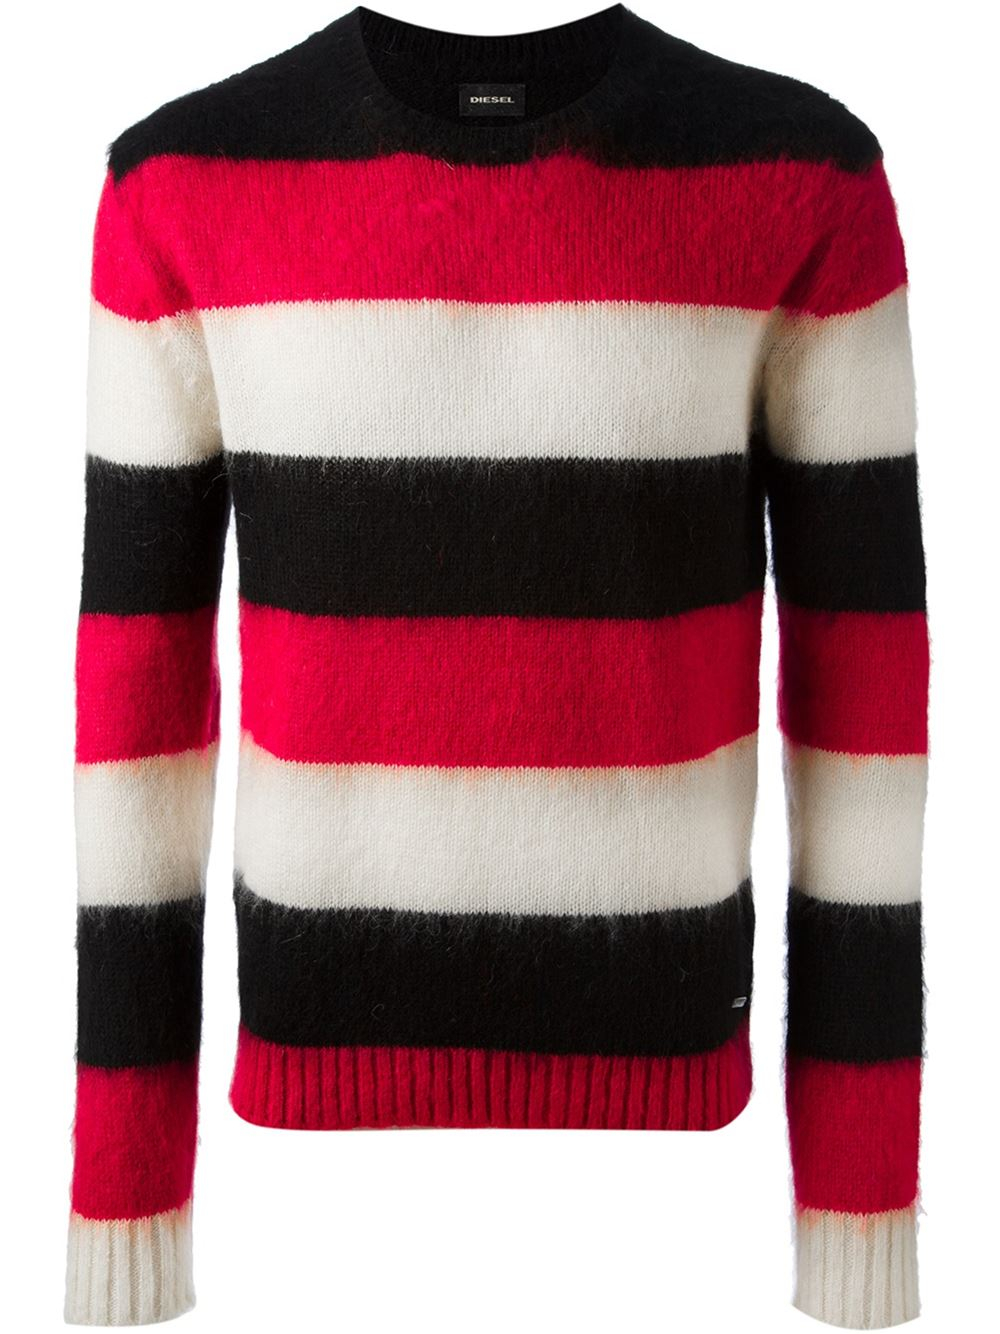 Warning Reproduce sew red and white striped sweater Borrowed maniac ...